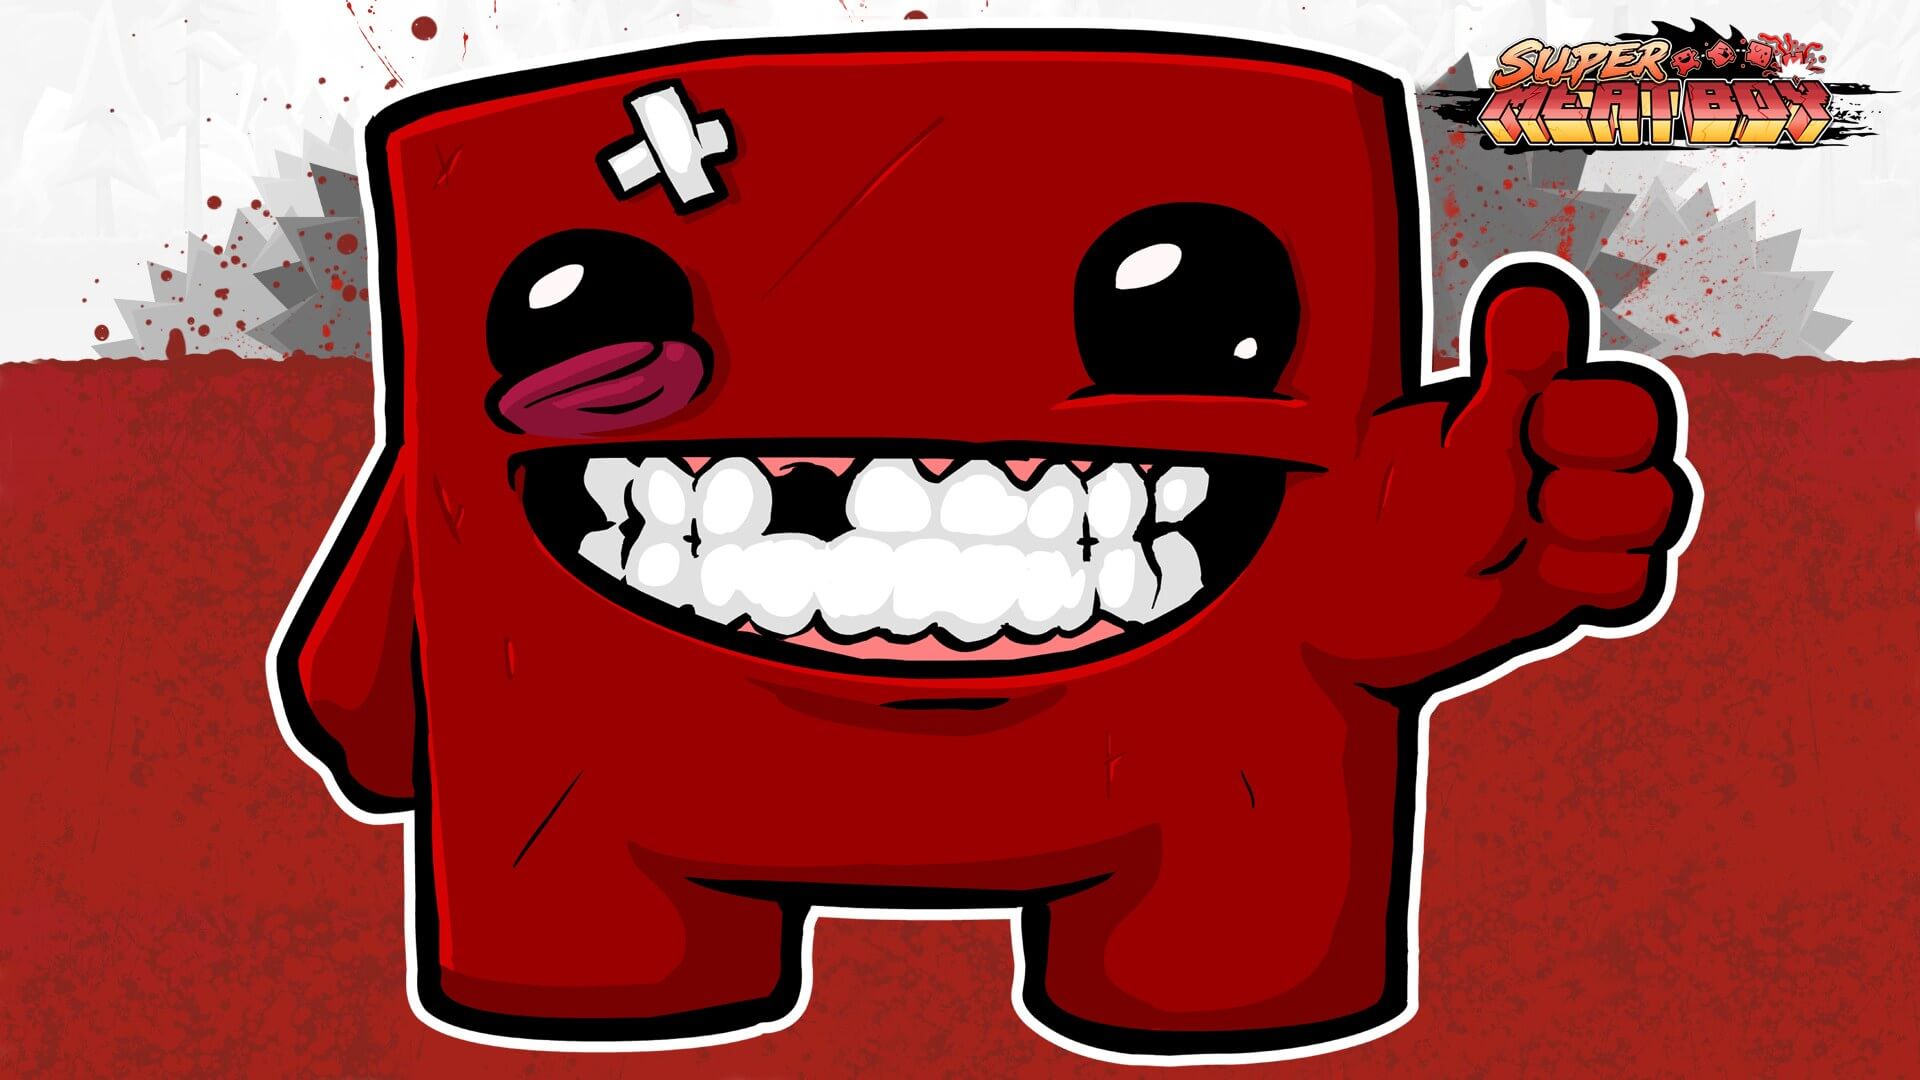 Super Meat Boy is available for free from the Epic Games Store